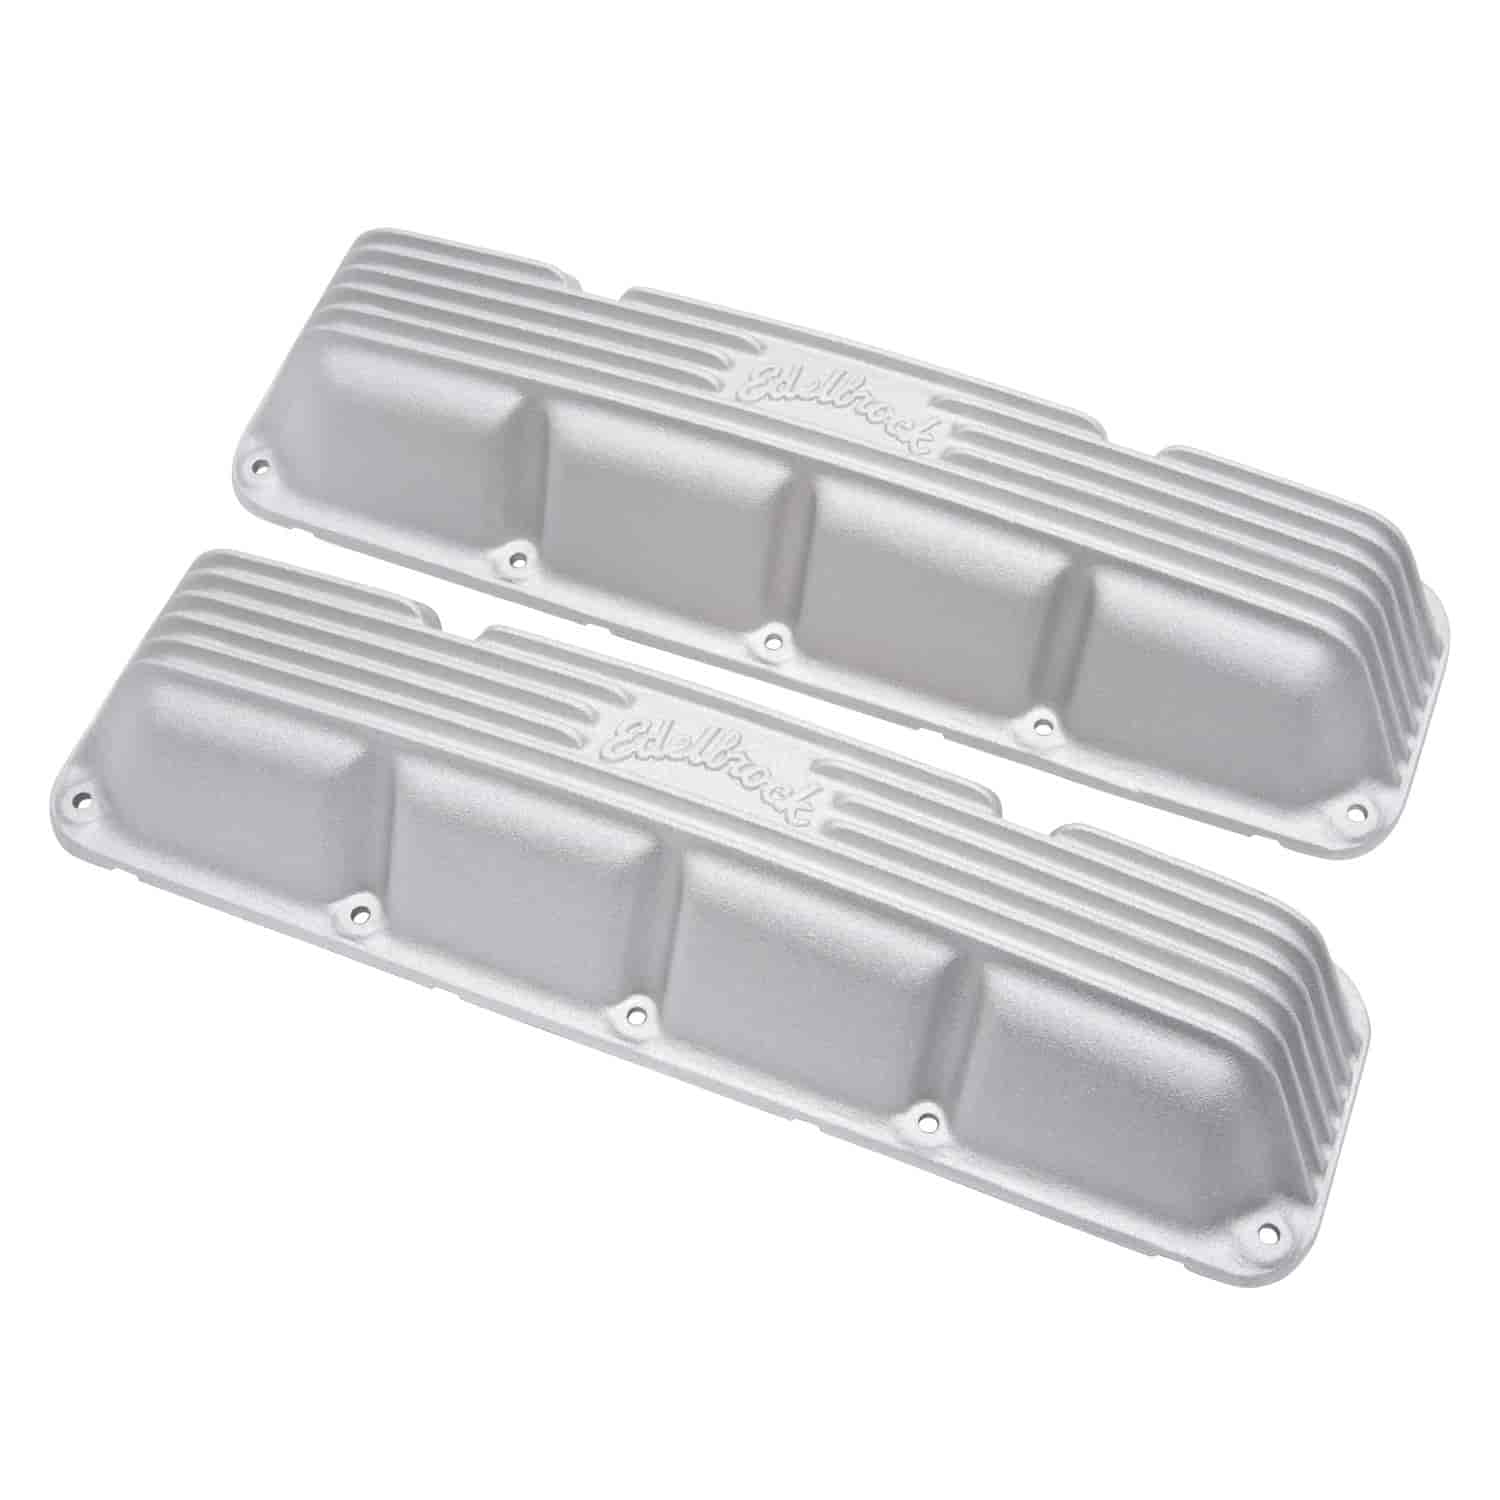 Classic Finned Valve Covers for 1967-1991 AMC/Jeep 290-401 V8 with Satin Finish